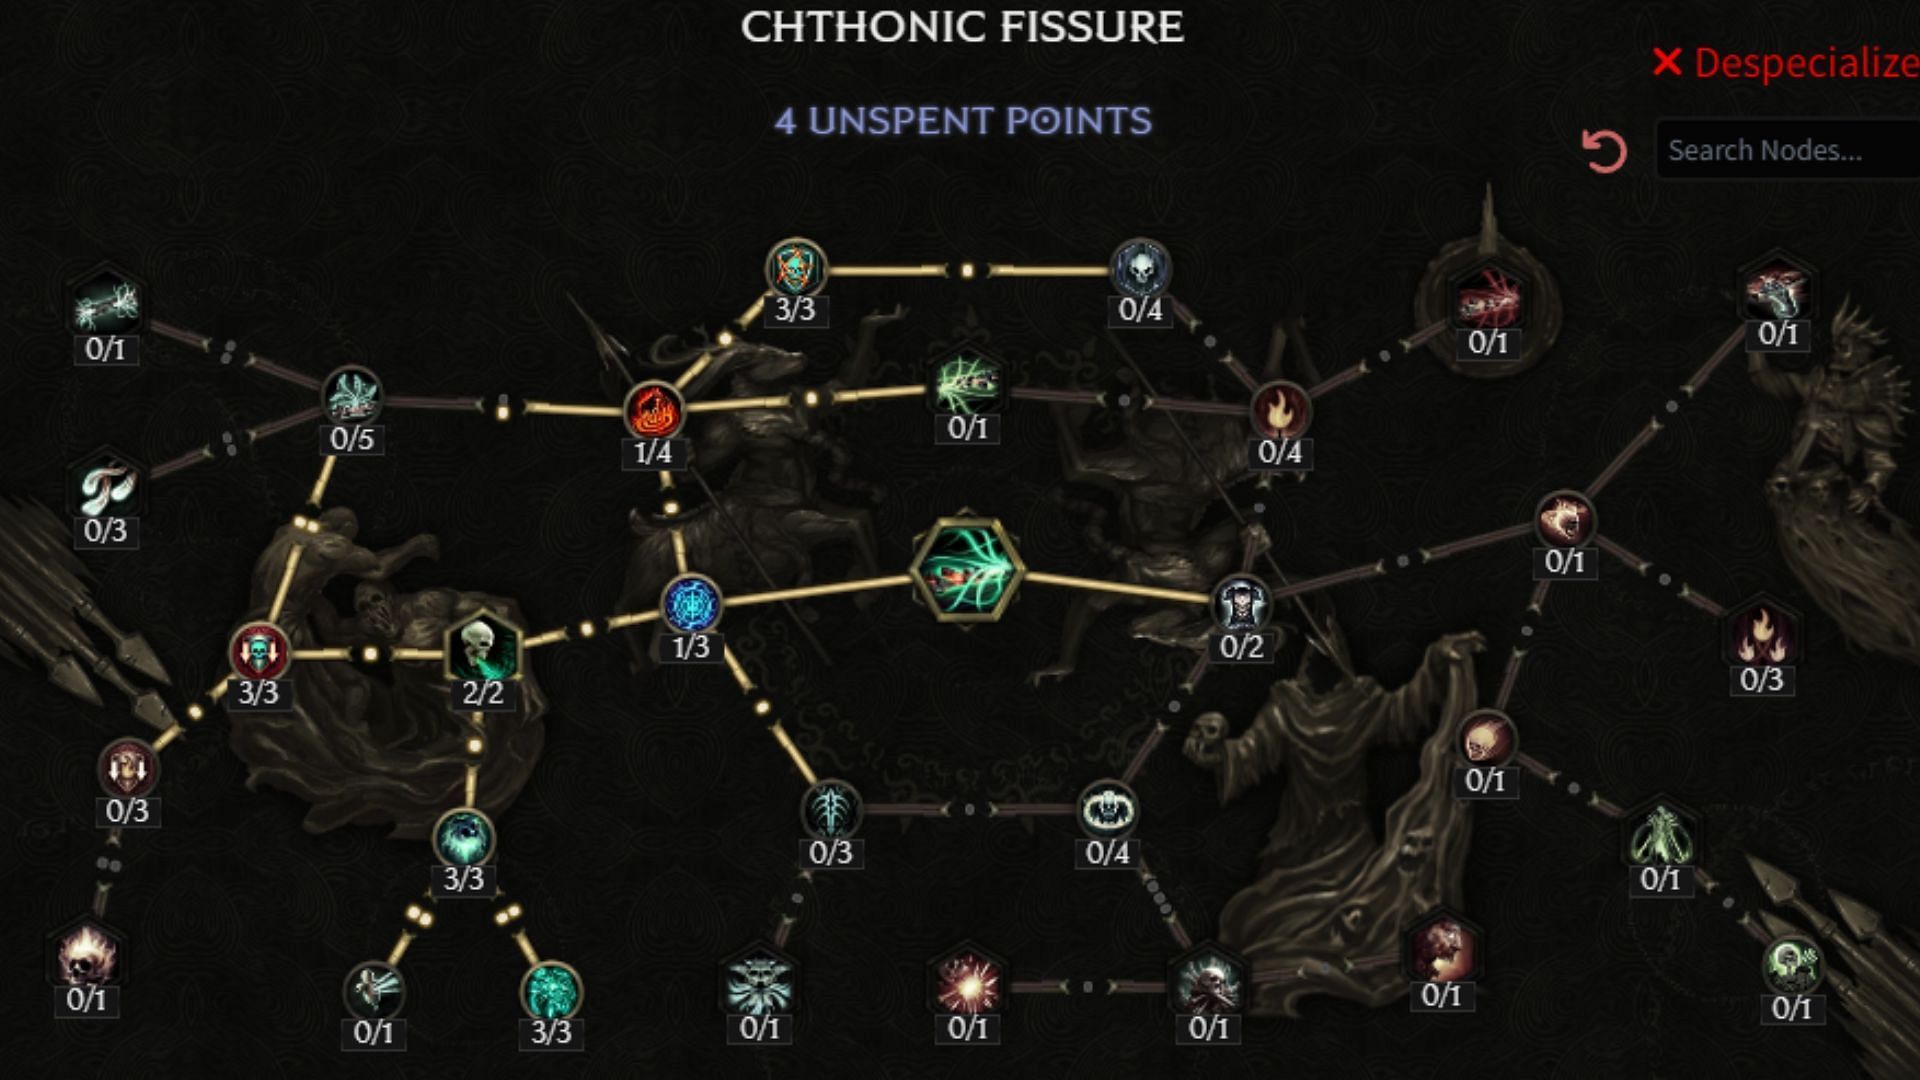 The recommended perks for Chthonic Fissure (Image via Last Epoch Tools)